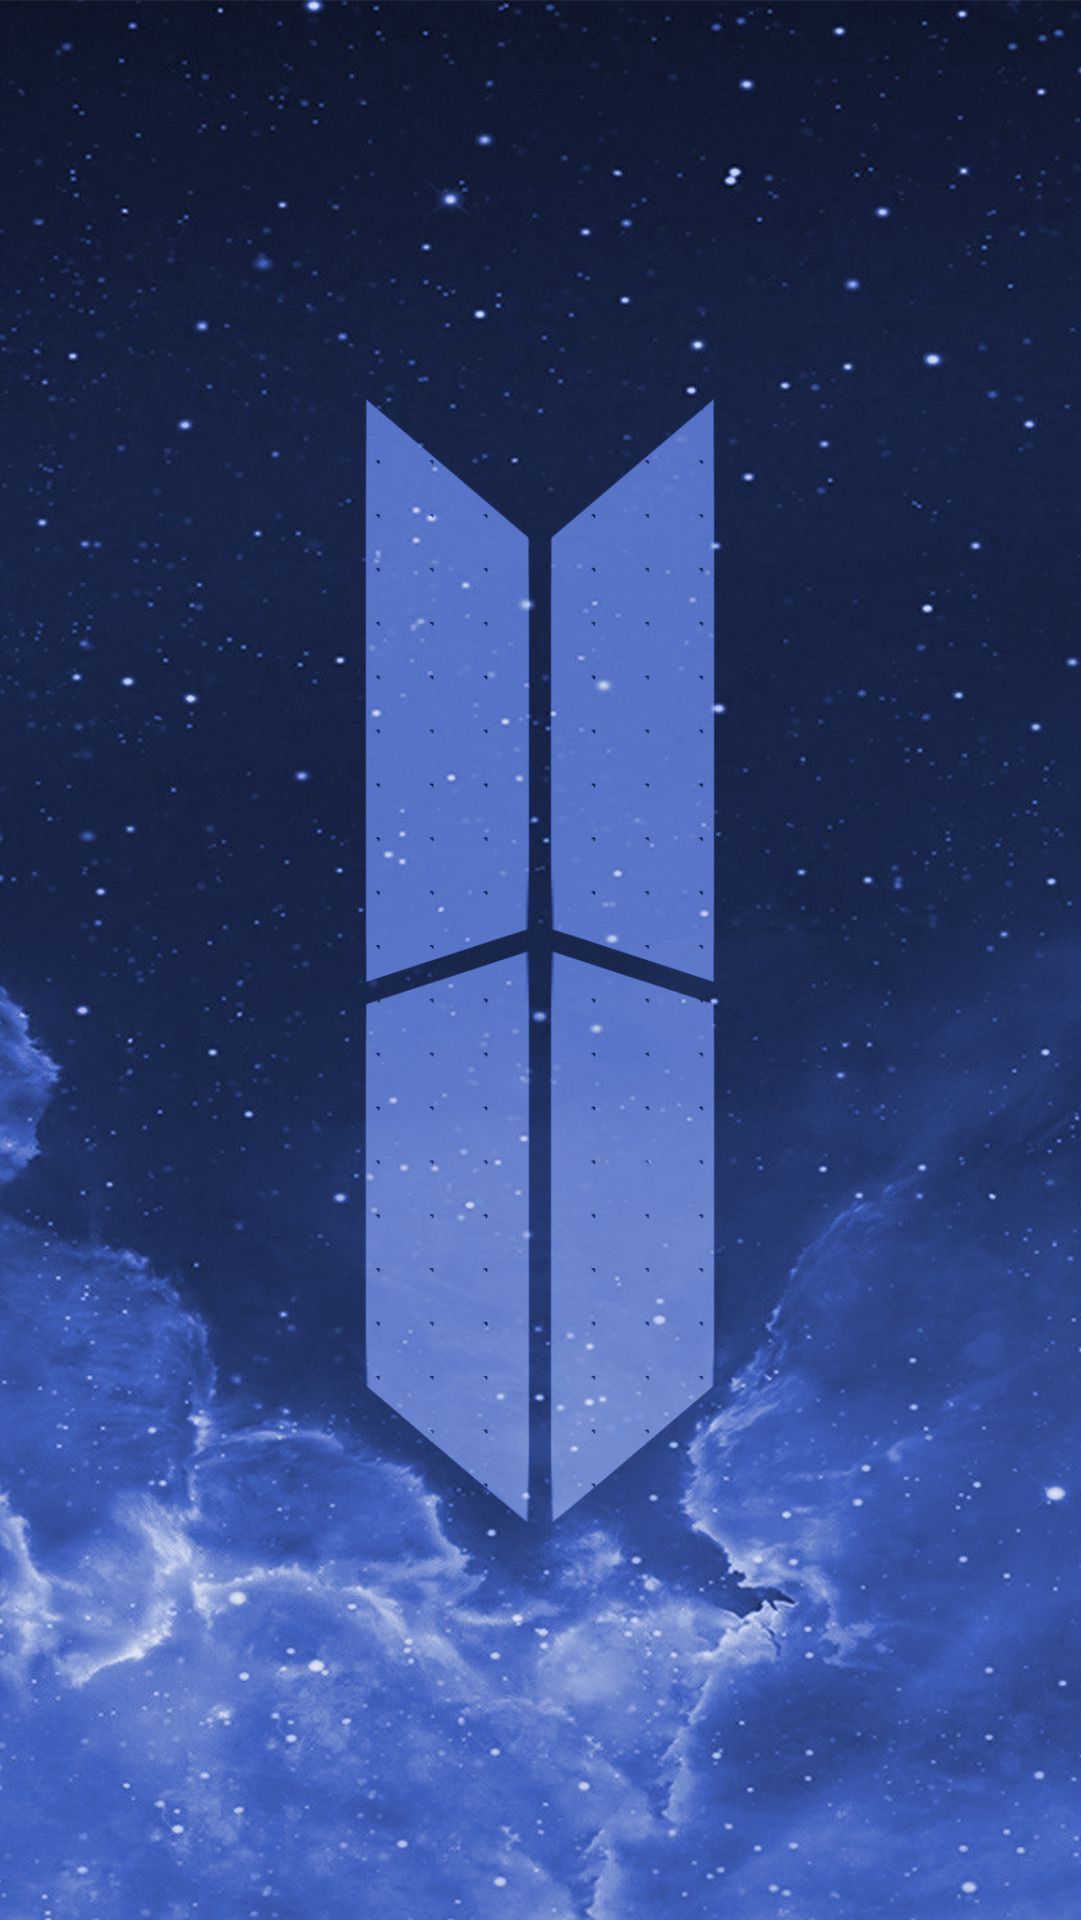 BTS Army Wallpaper BTS Army Wallpaper The Effective Picture We Offer You About Bt. Army wallpaper, Bts army, Bts army logo